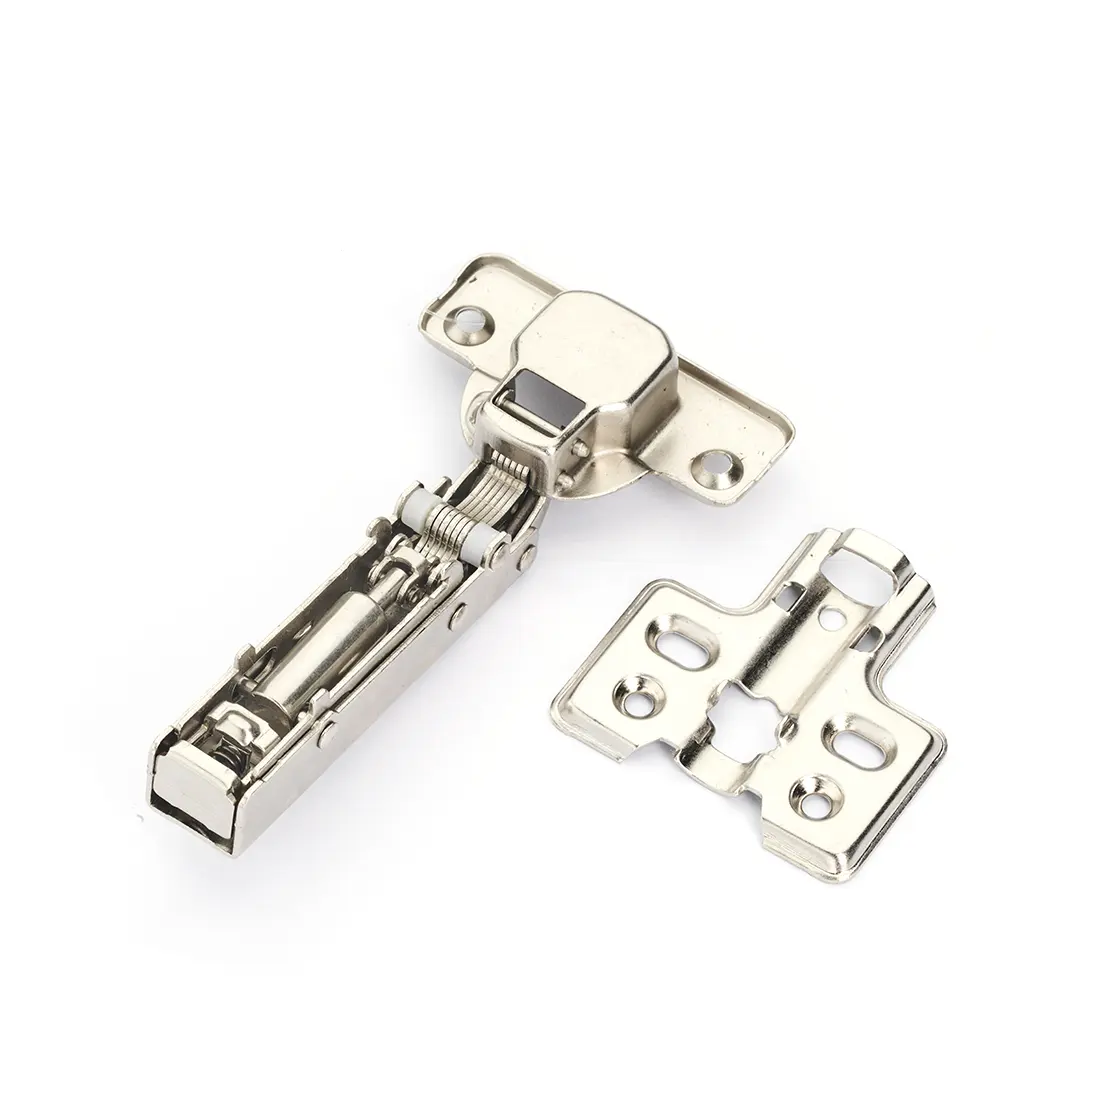 Onlee High Quality concealed clip on insert soft closing hydraulic Kitchen Cabinet Stainless Steel door hinge